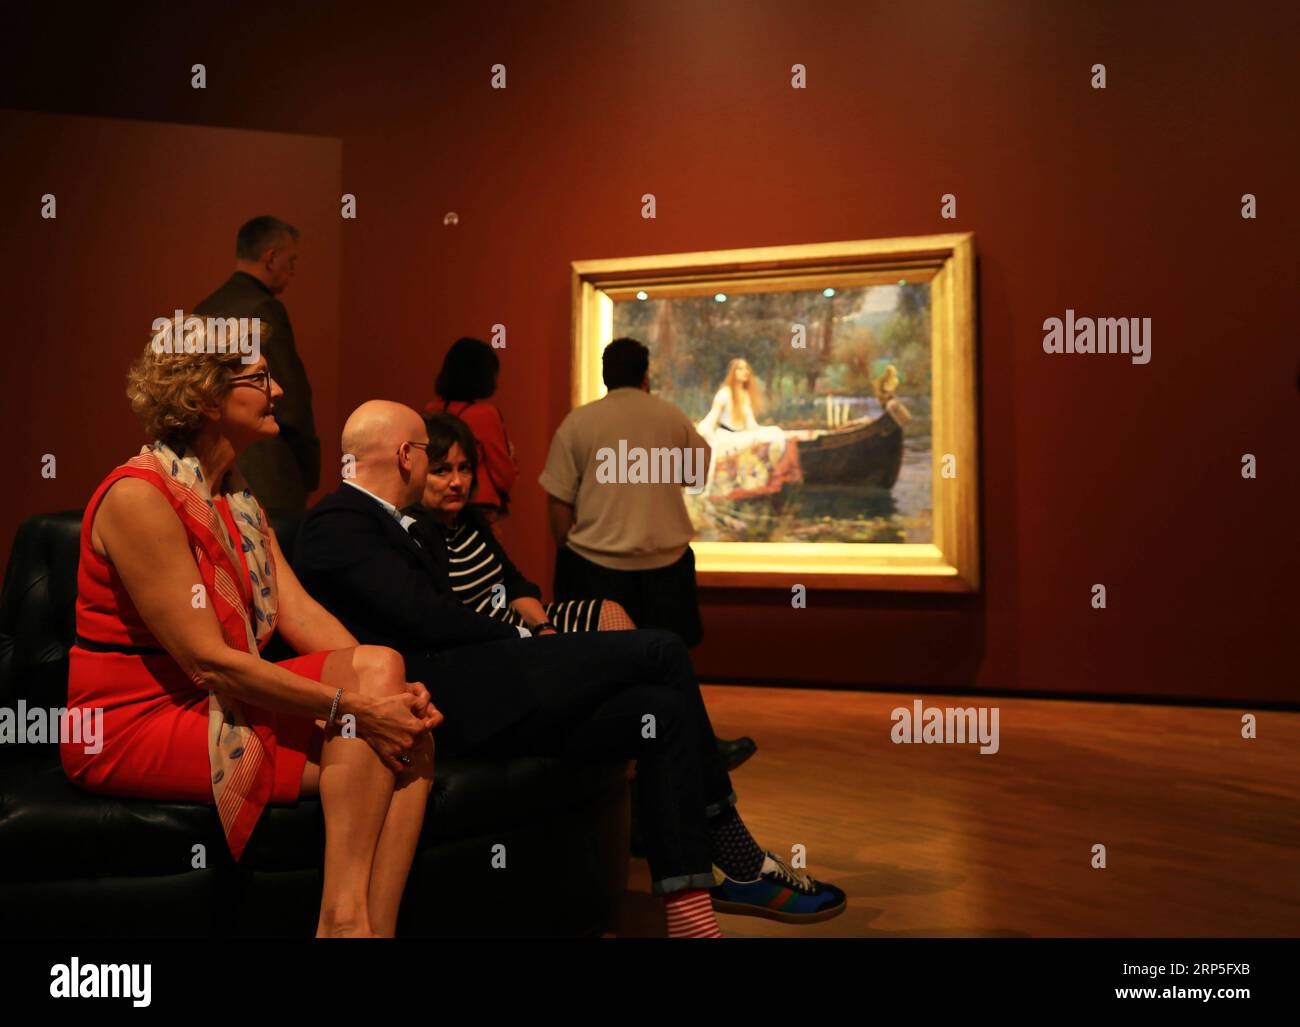 (181213) -- CANBERRA, Dec. 13, 2018 -- People view The Lady of Shalott at the National Gallery of Australia (NGA) in Canberra, Australia, Dec. 12, 2018. For the first time paintings The Lady of Shalott and Ophelia left Britain for Australia, as an exhibition named Love and Desire: Pre-Raphaelite Masterpieces from the Tate , will open to the public in the NGA on Friday. ) (wyo) AUSTRALIA-CANBERRA-EXHIBITION-BRITISH MASTERPIECES PanxXiangyue PUBLICATIONxNOTxINxCHN Stock Photo